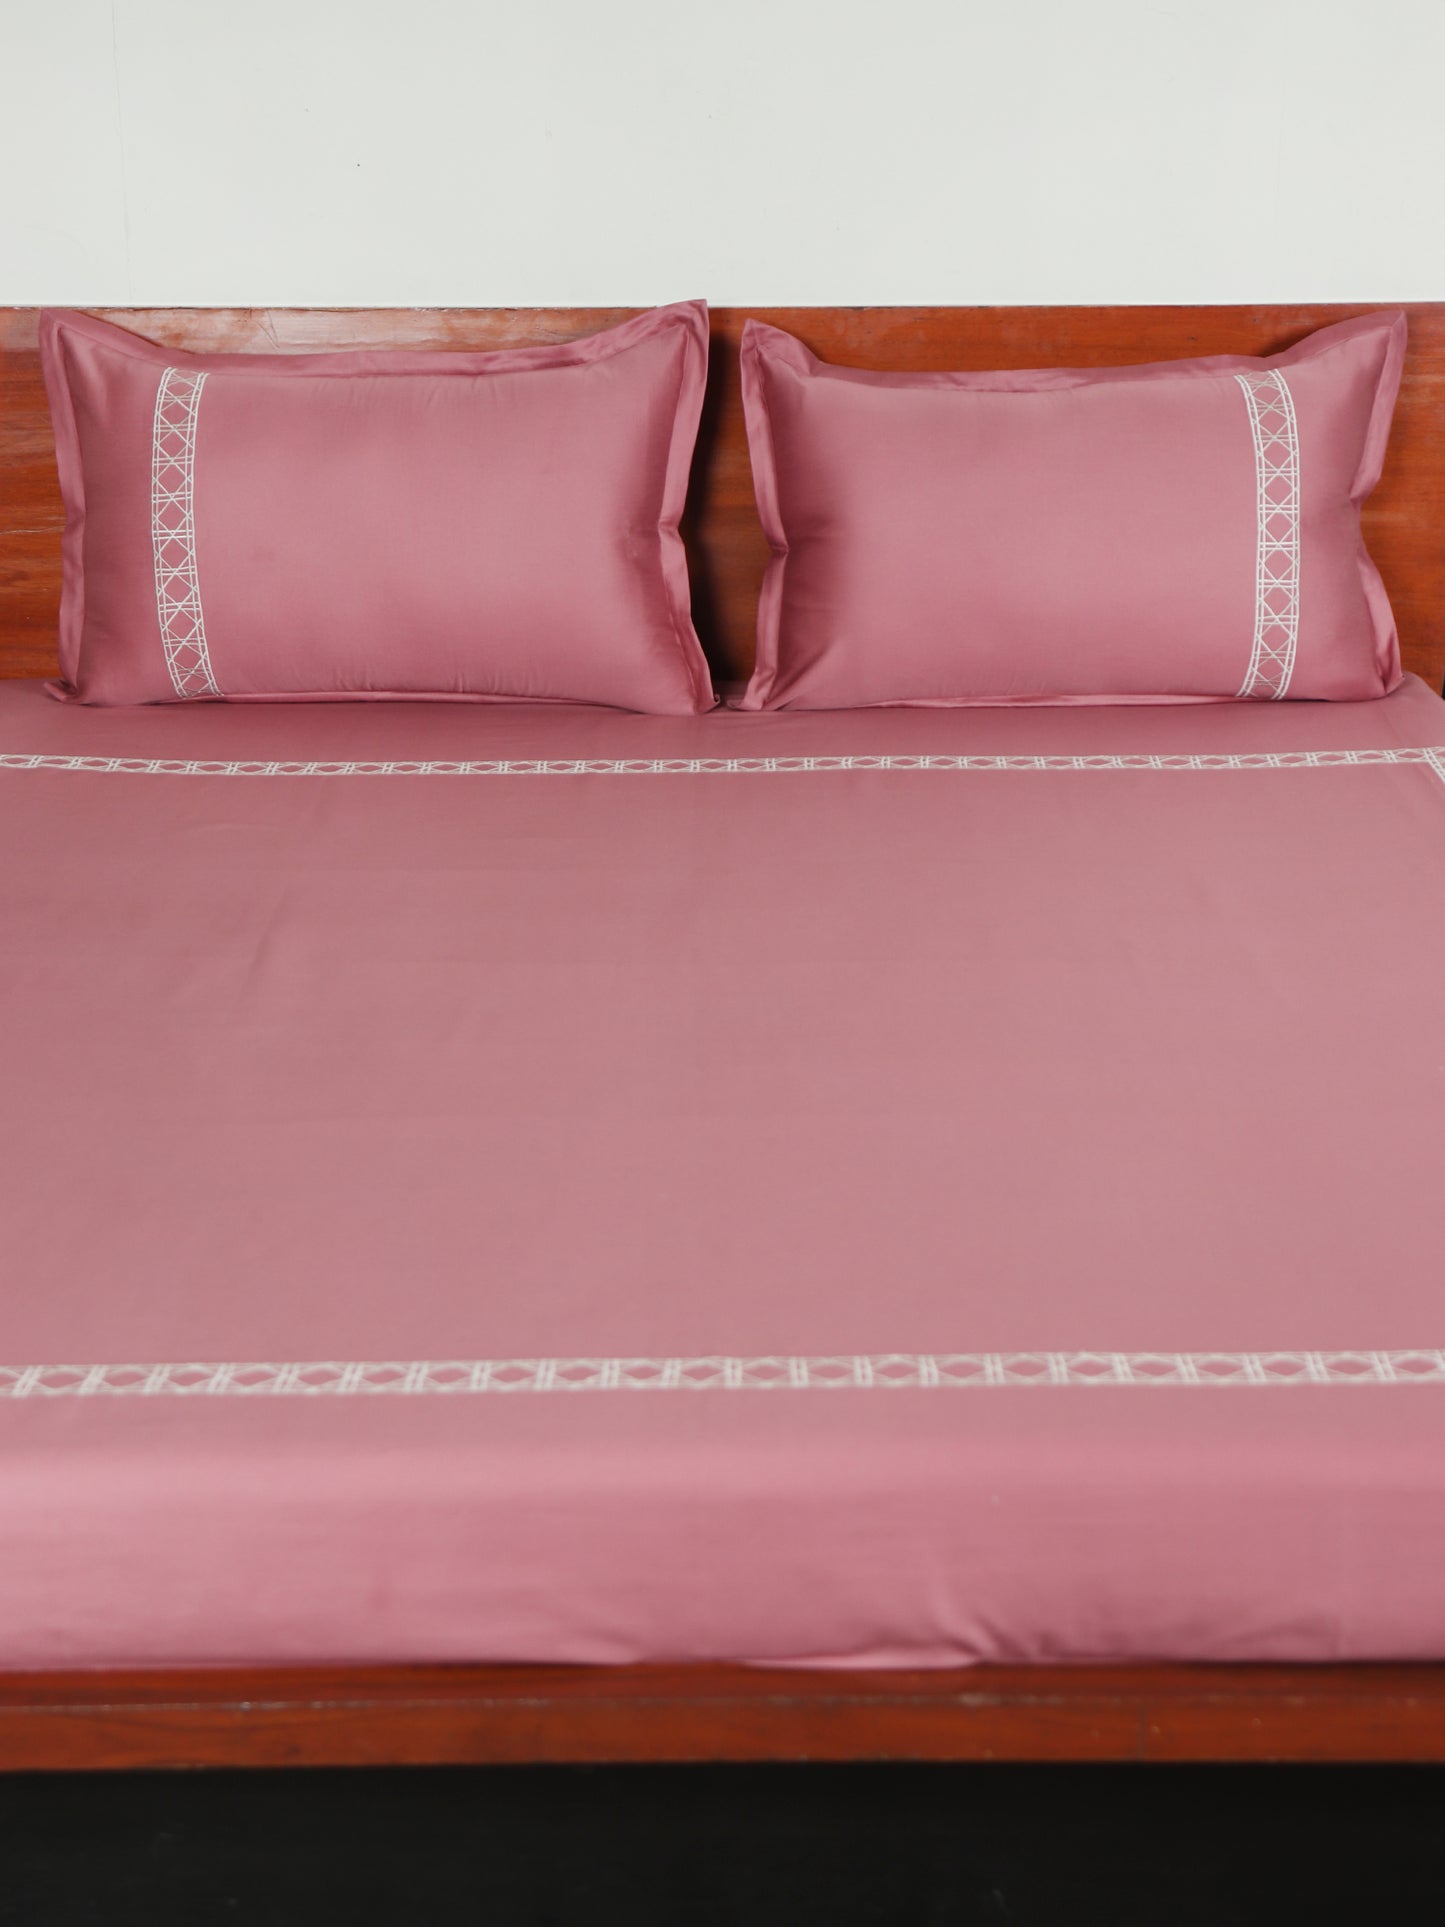 Bedsheet 100% Cotton 500TC Embroidered  for King Size Double Bed with Pillow Covers Dusky Pink - Bedsheet 108x108inches, Pillow Covers 17x27inches